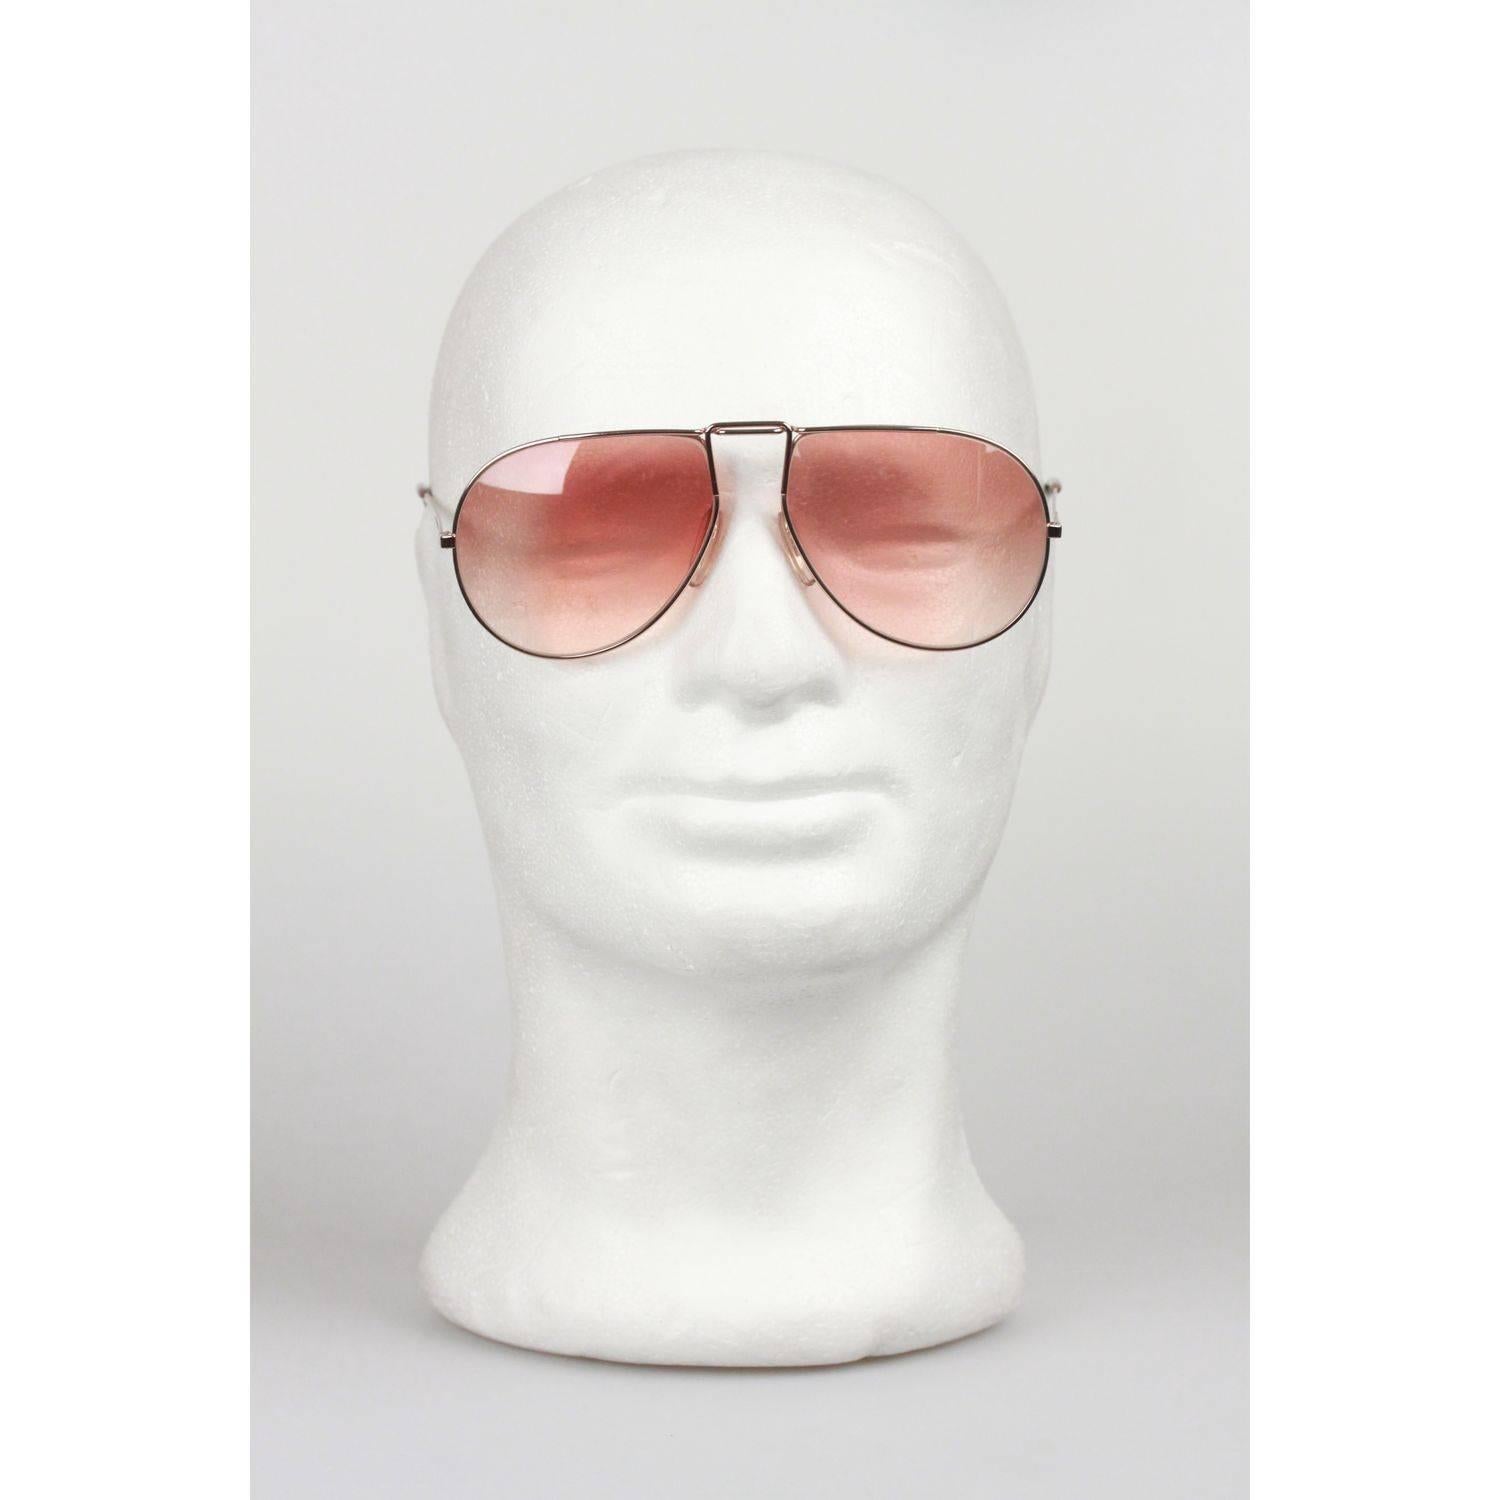 - Gold-tone and Red metal sunglasses by Zeiss from the early 80s
- Made in West Germany
- Original 'Umbramatic lens' darken automatically in the sun
- 100% UV lens
- Aviator-design from West Germany
- Lightweight & very pleasant to wear 
- Style